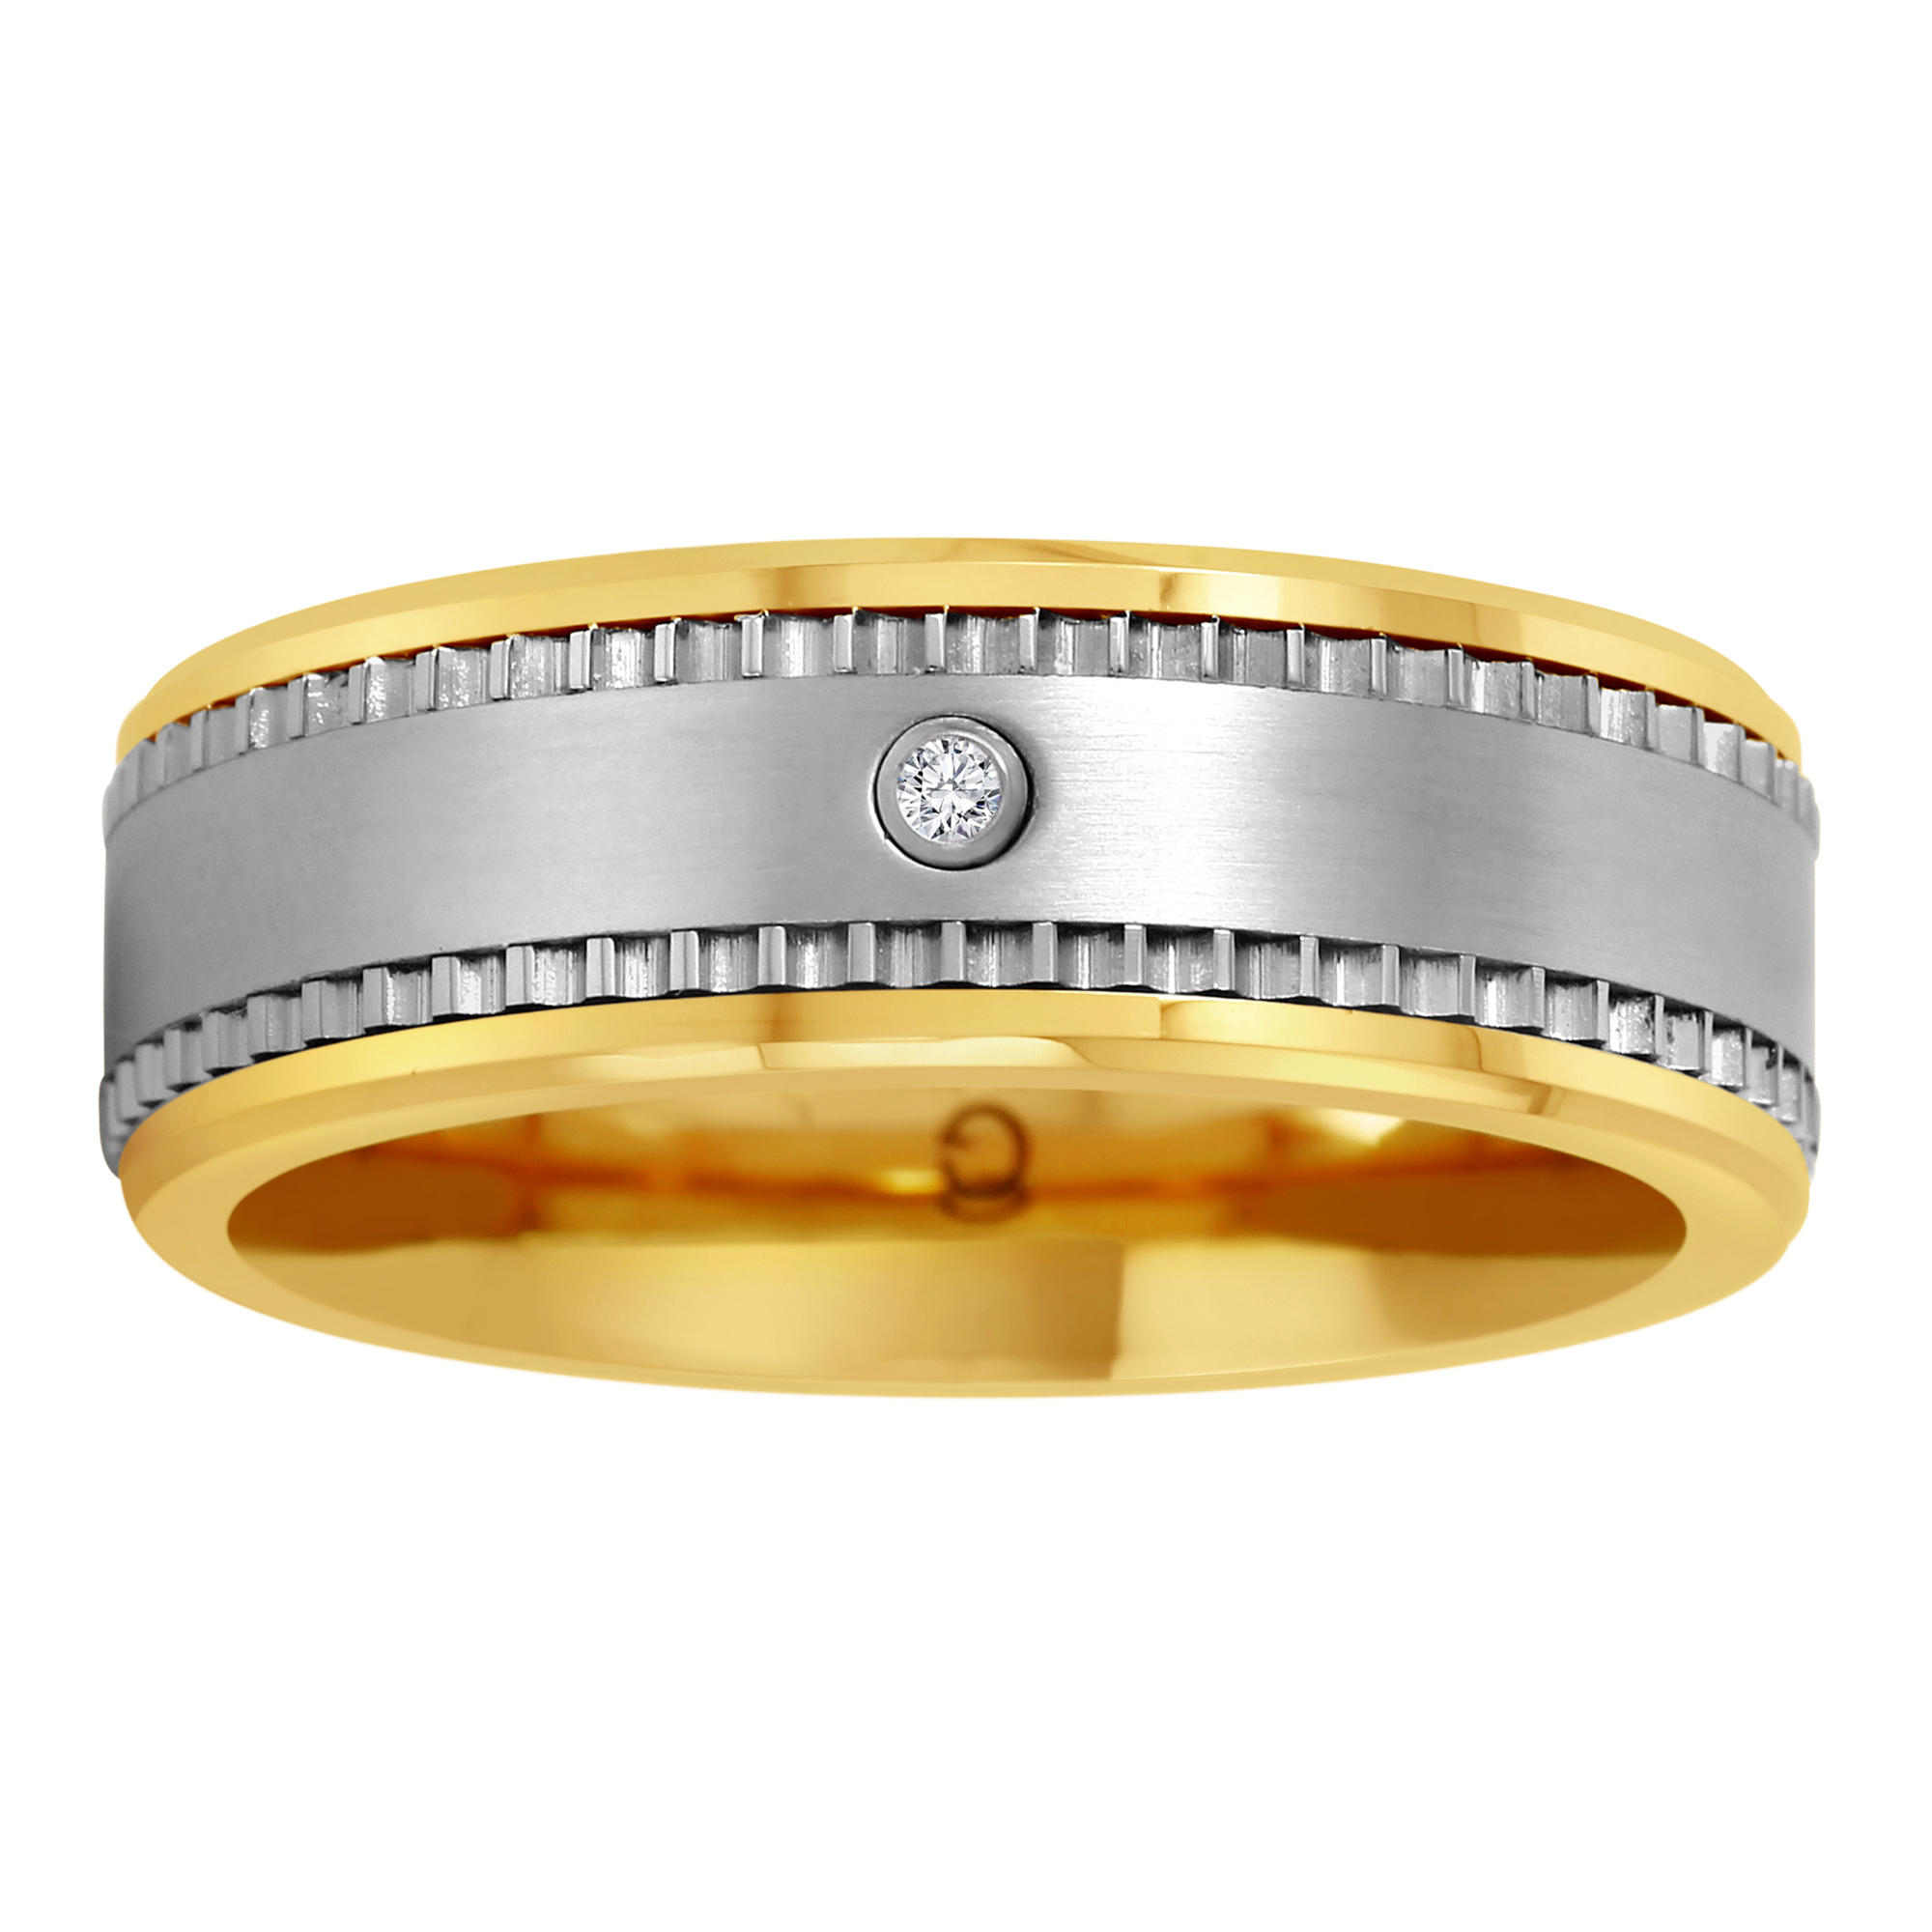 Stainless Steel and Ceramic with  Diamond Accent Band